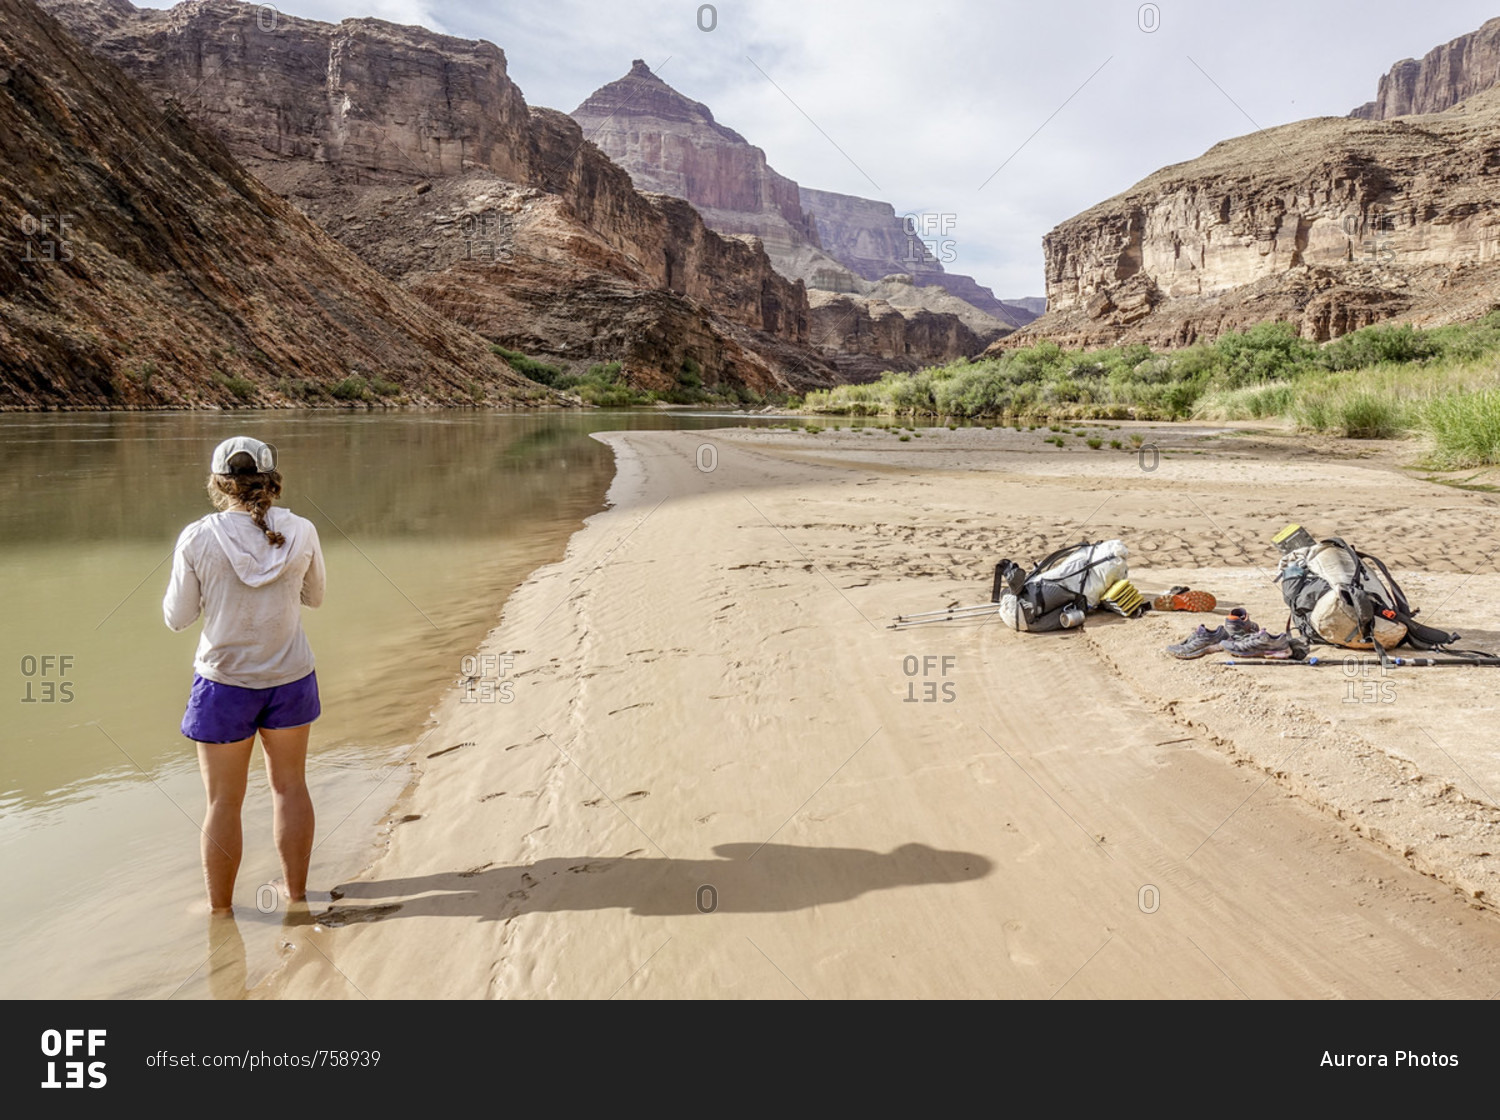 Taking break from hot day of hiking in Grand Canyon, young woman cooling off with her feet immersed in Colorado River, Grand Canyon, Arizona, USA